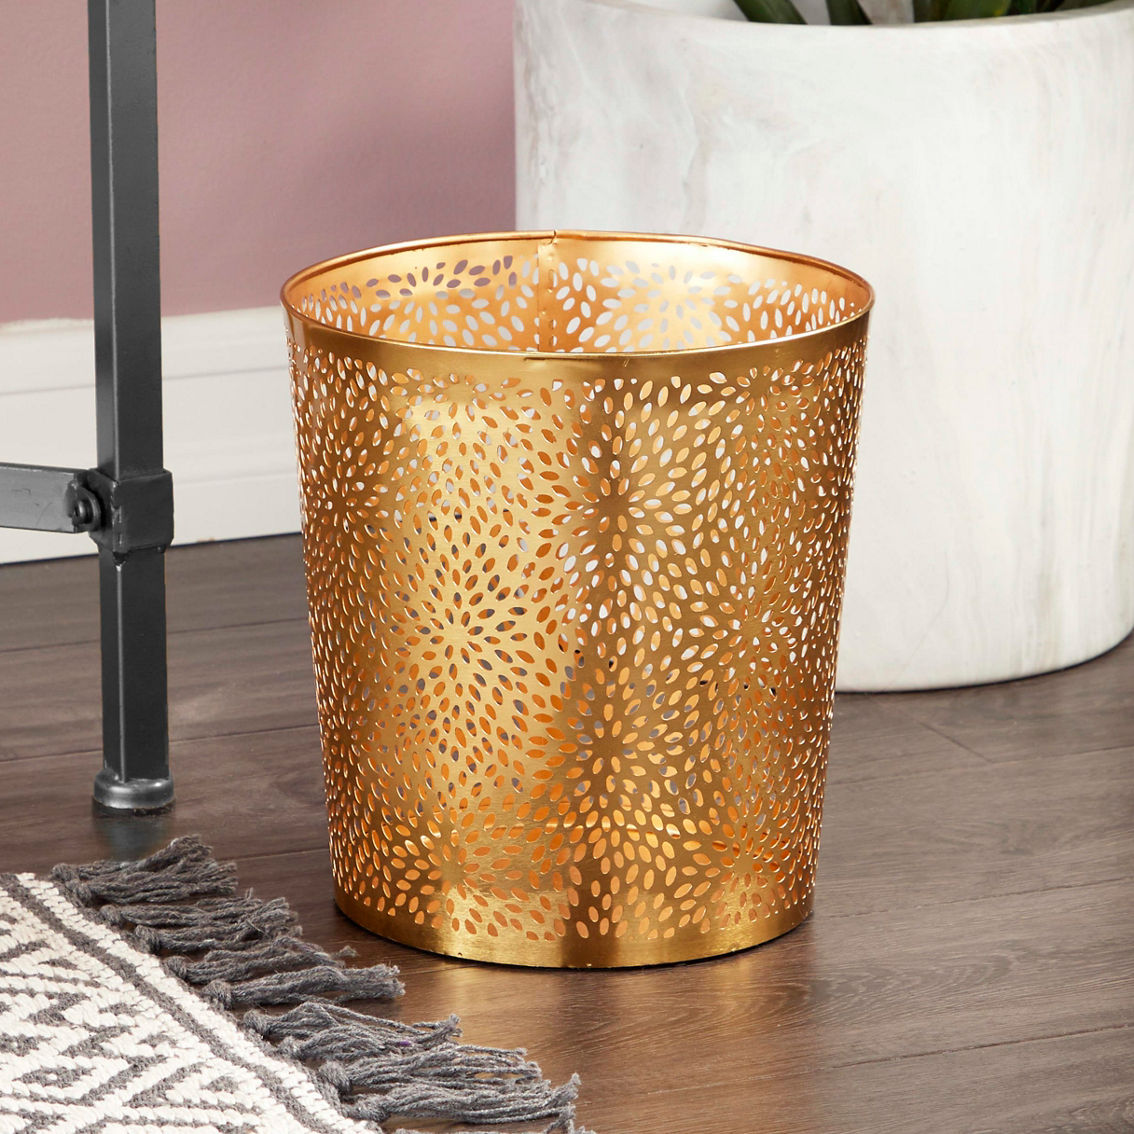 CosmoLiving by Cosmopolitan Glam Gold Metal Small Waste Bin - Image 4 of 5